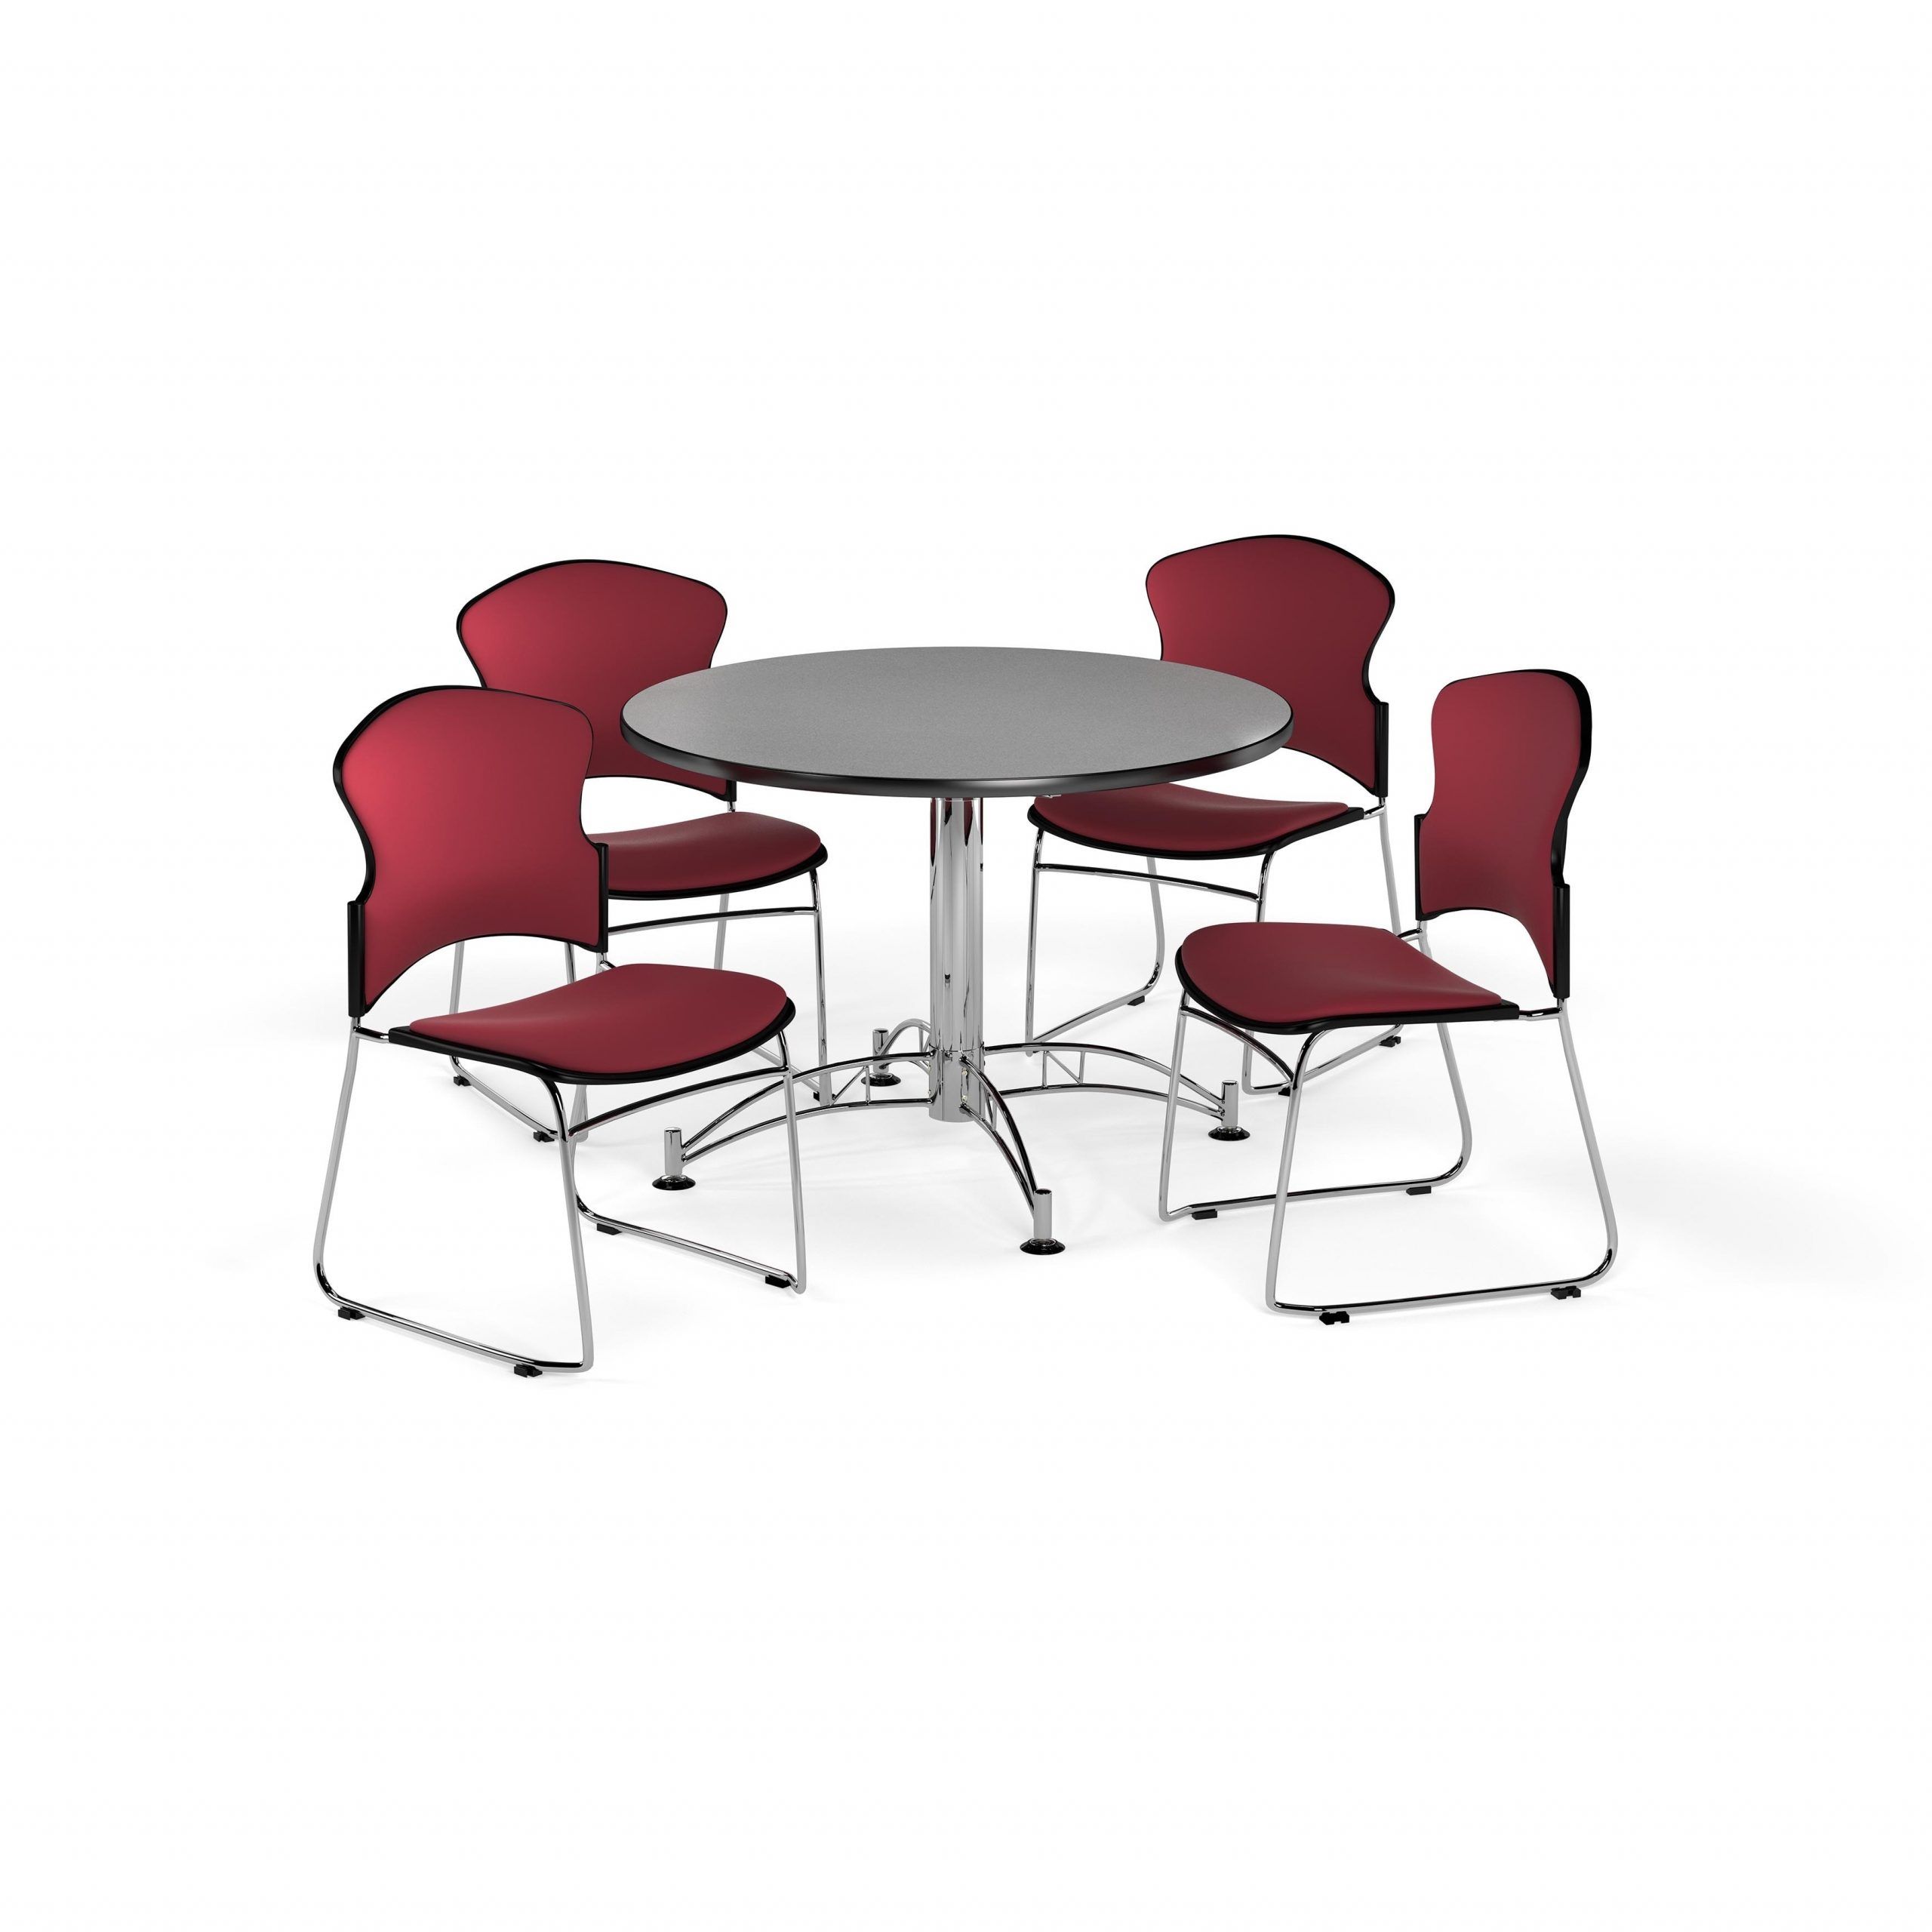 Widely Used Mode Round Breakroom Tables Pertaining To Ofm Gray 42 Inch Round Break Room Multi Purpose Table With (View 9 of 20)